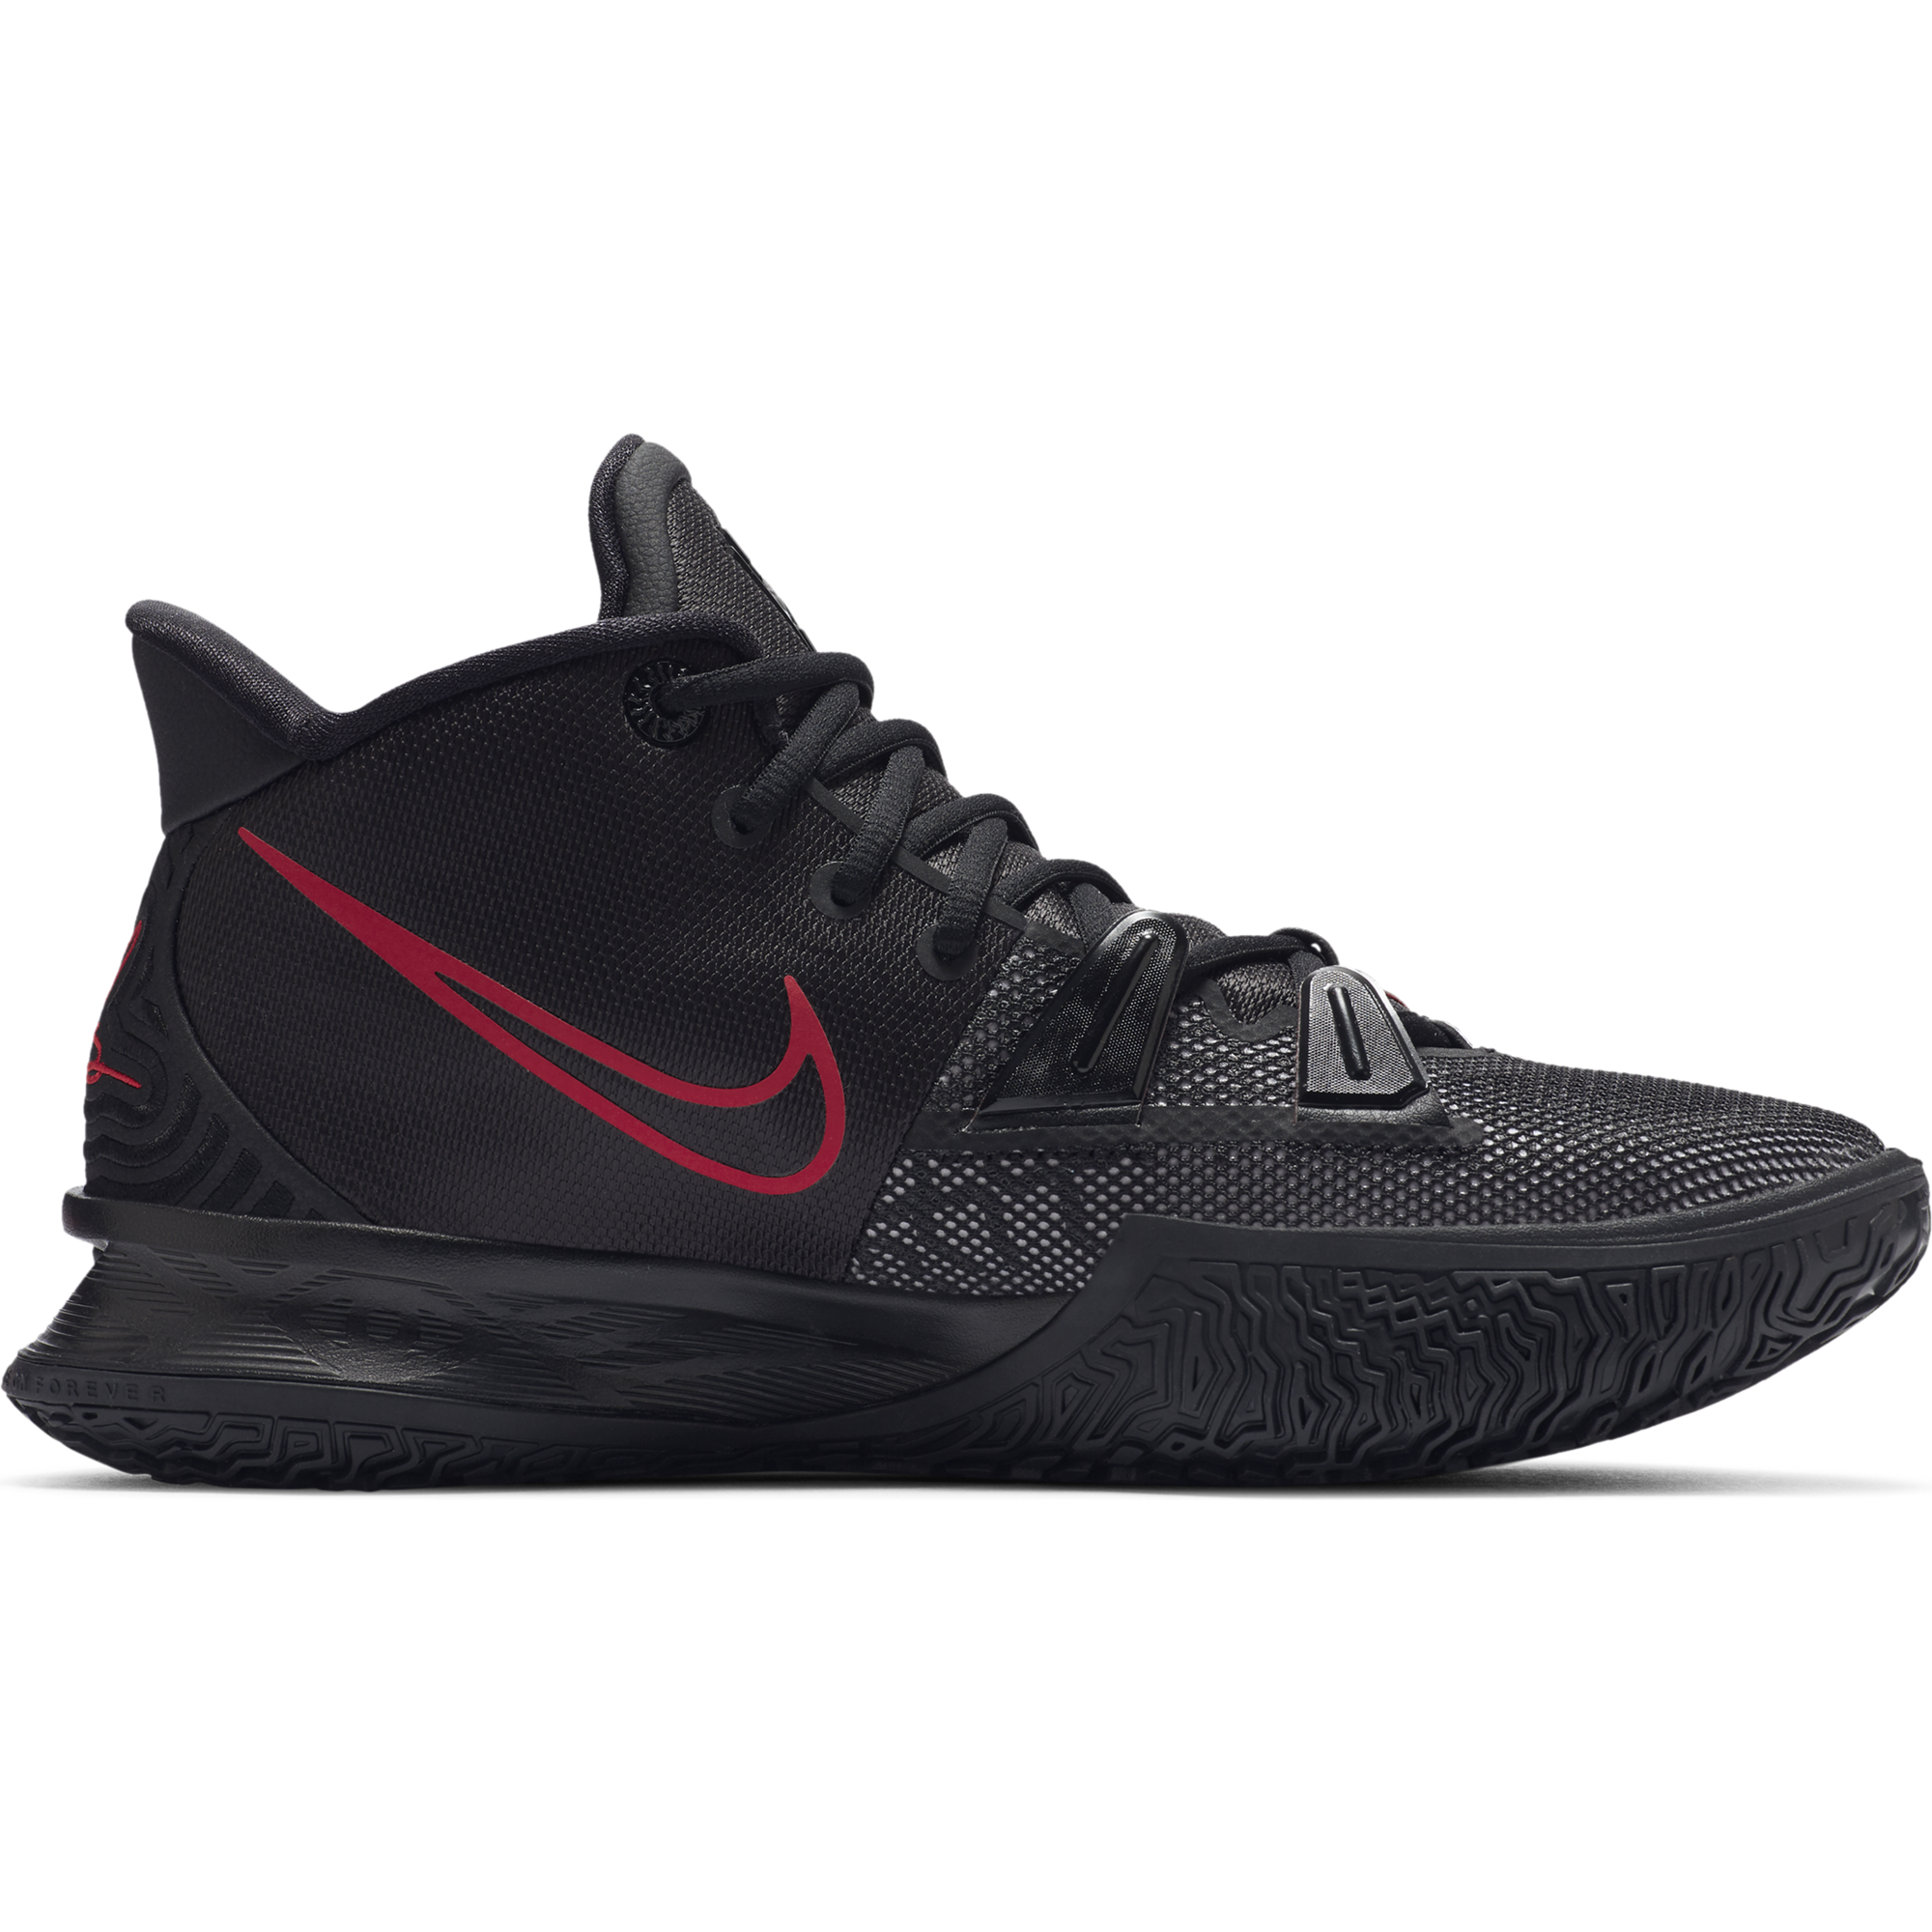 kyrie shoes 7